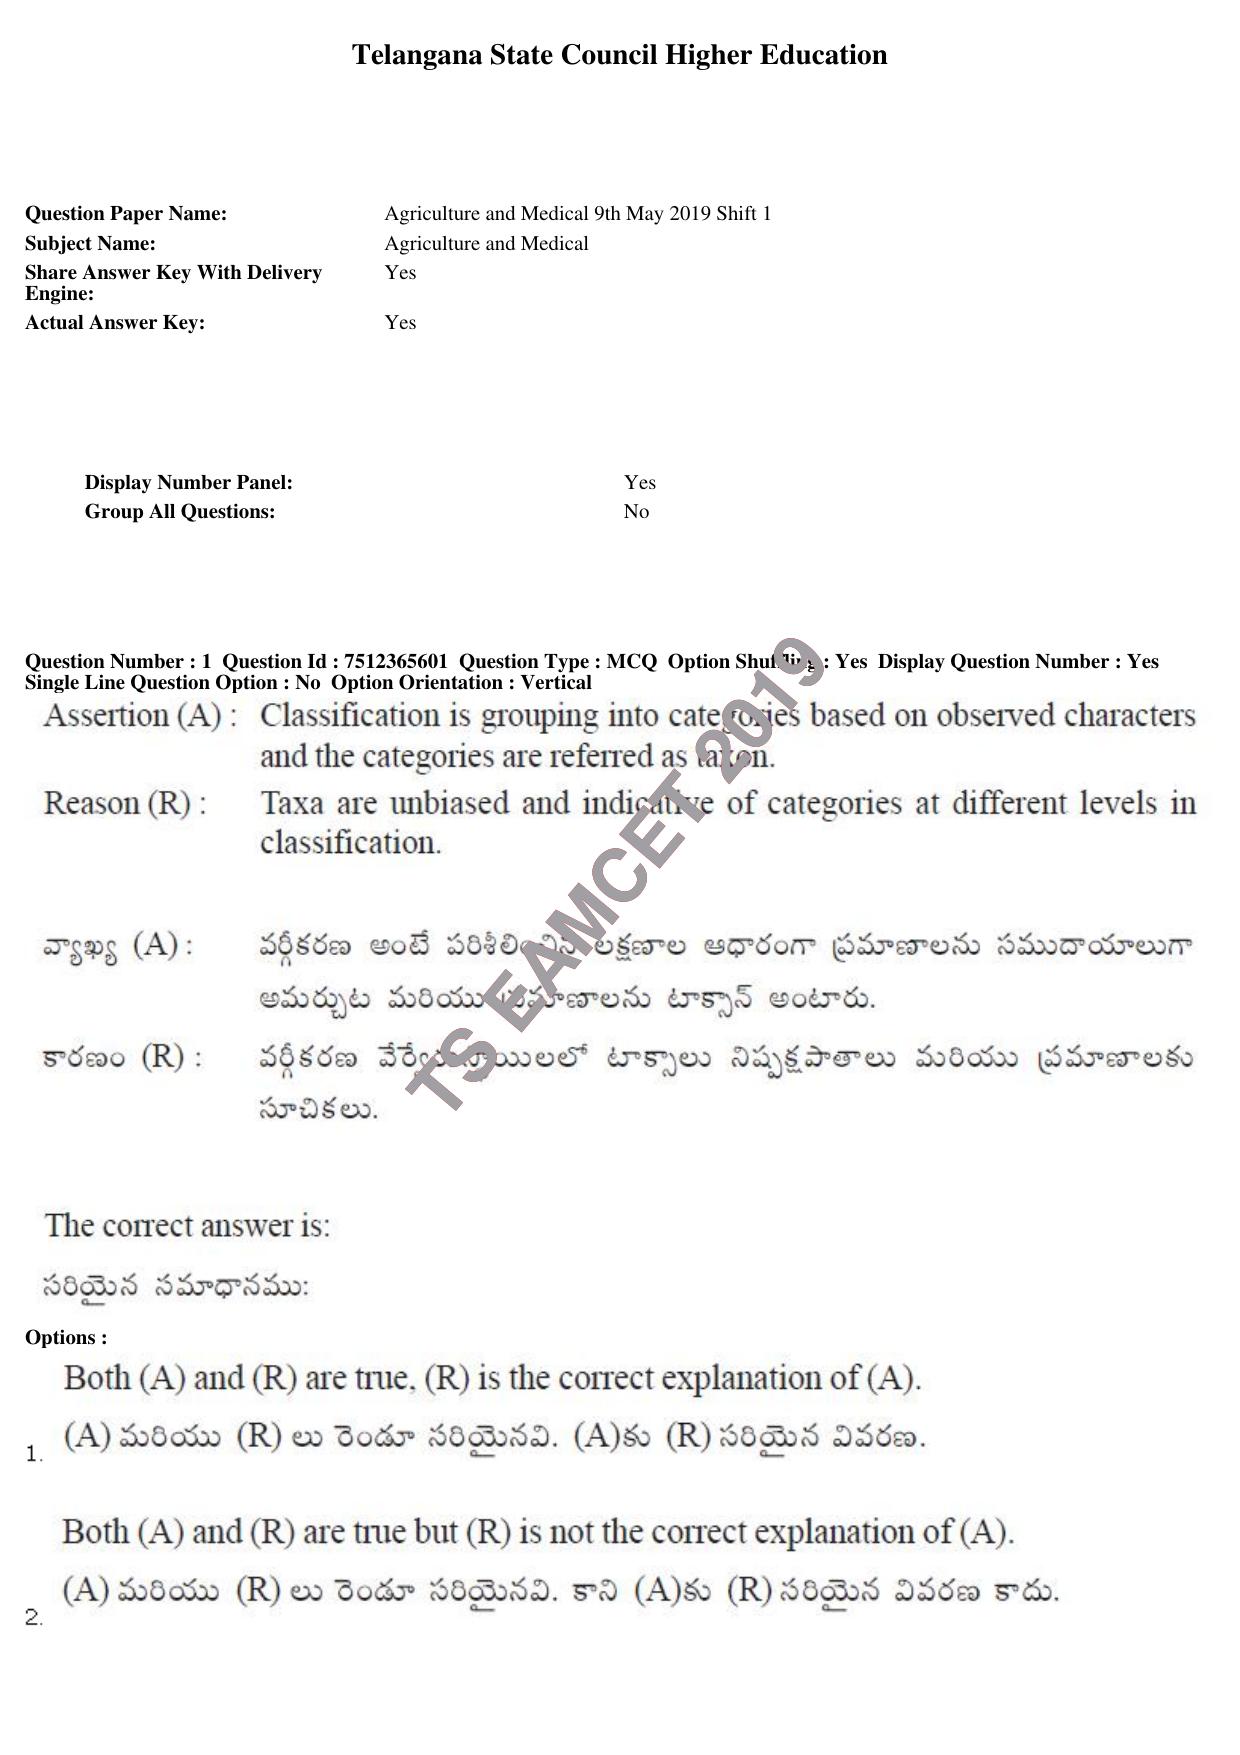 TS EAMCET 2019 Agriculture and Medical Question Paper with Key (9 May 2019 Forenoon) - Page 1